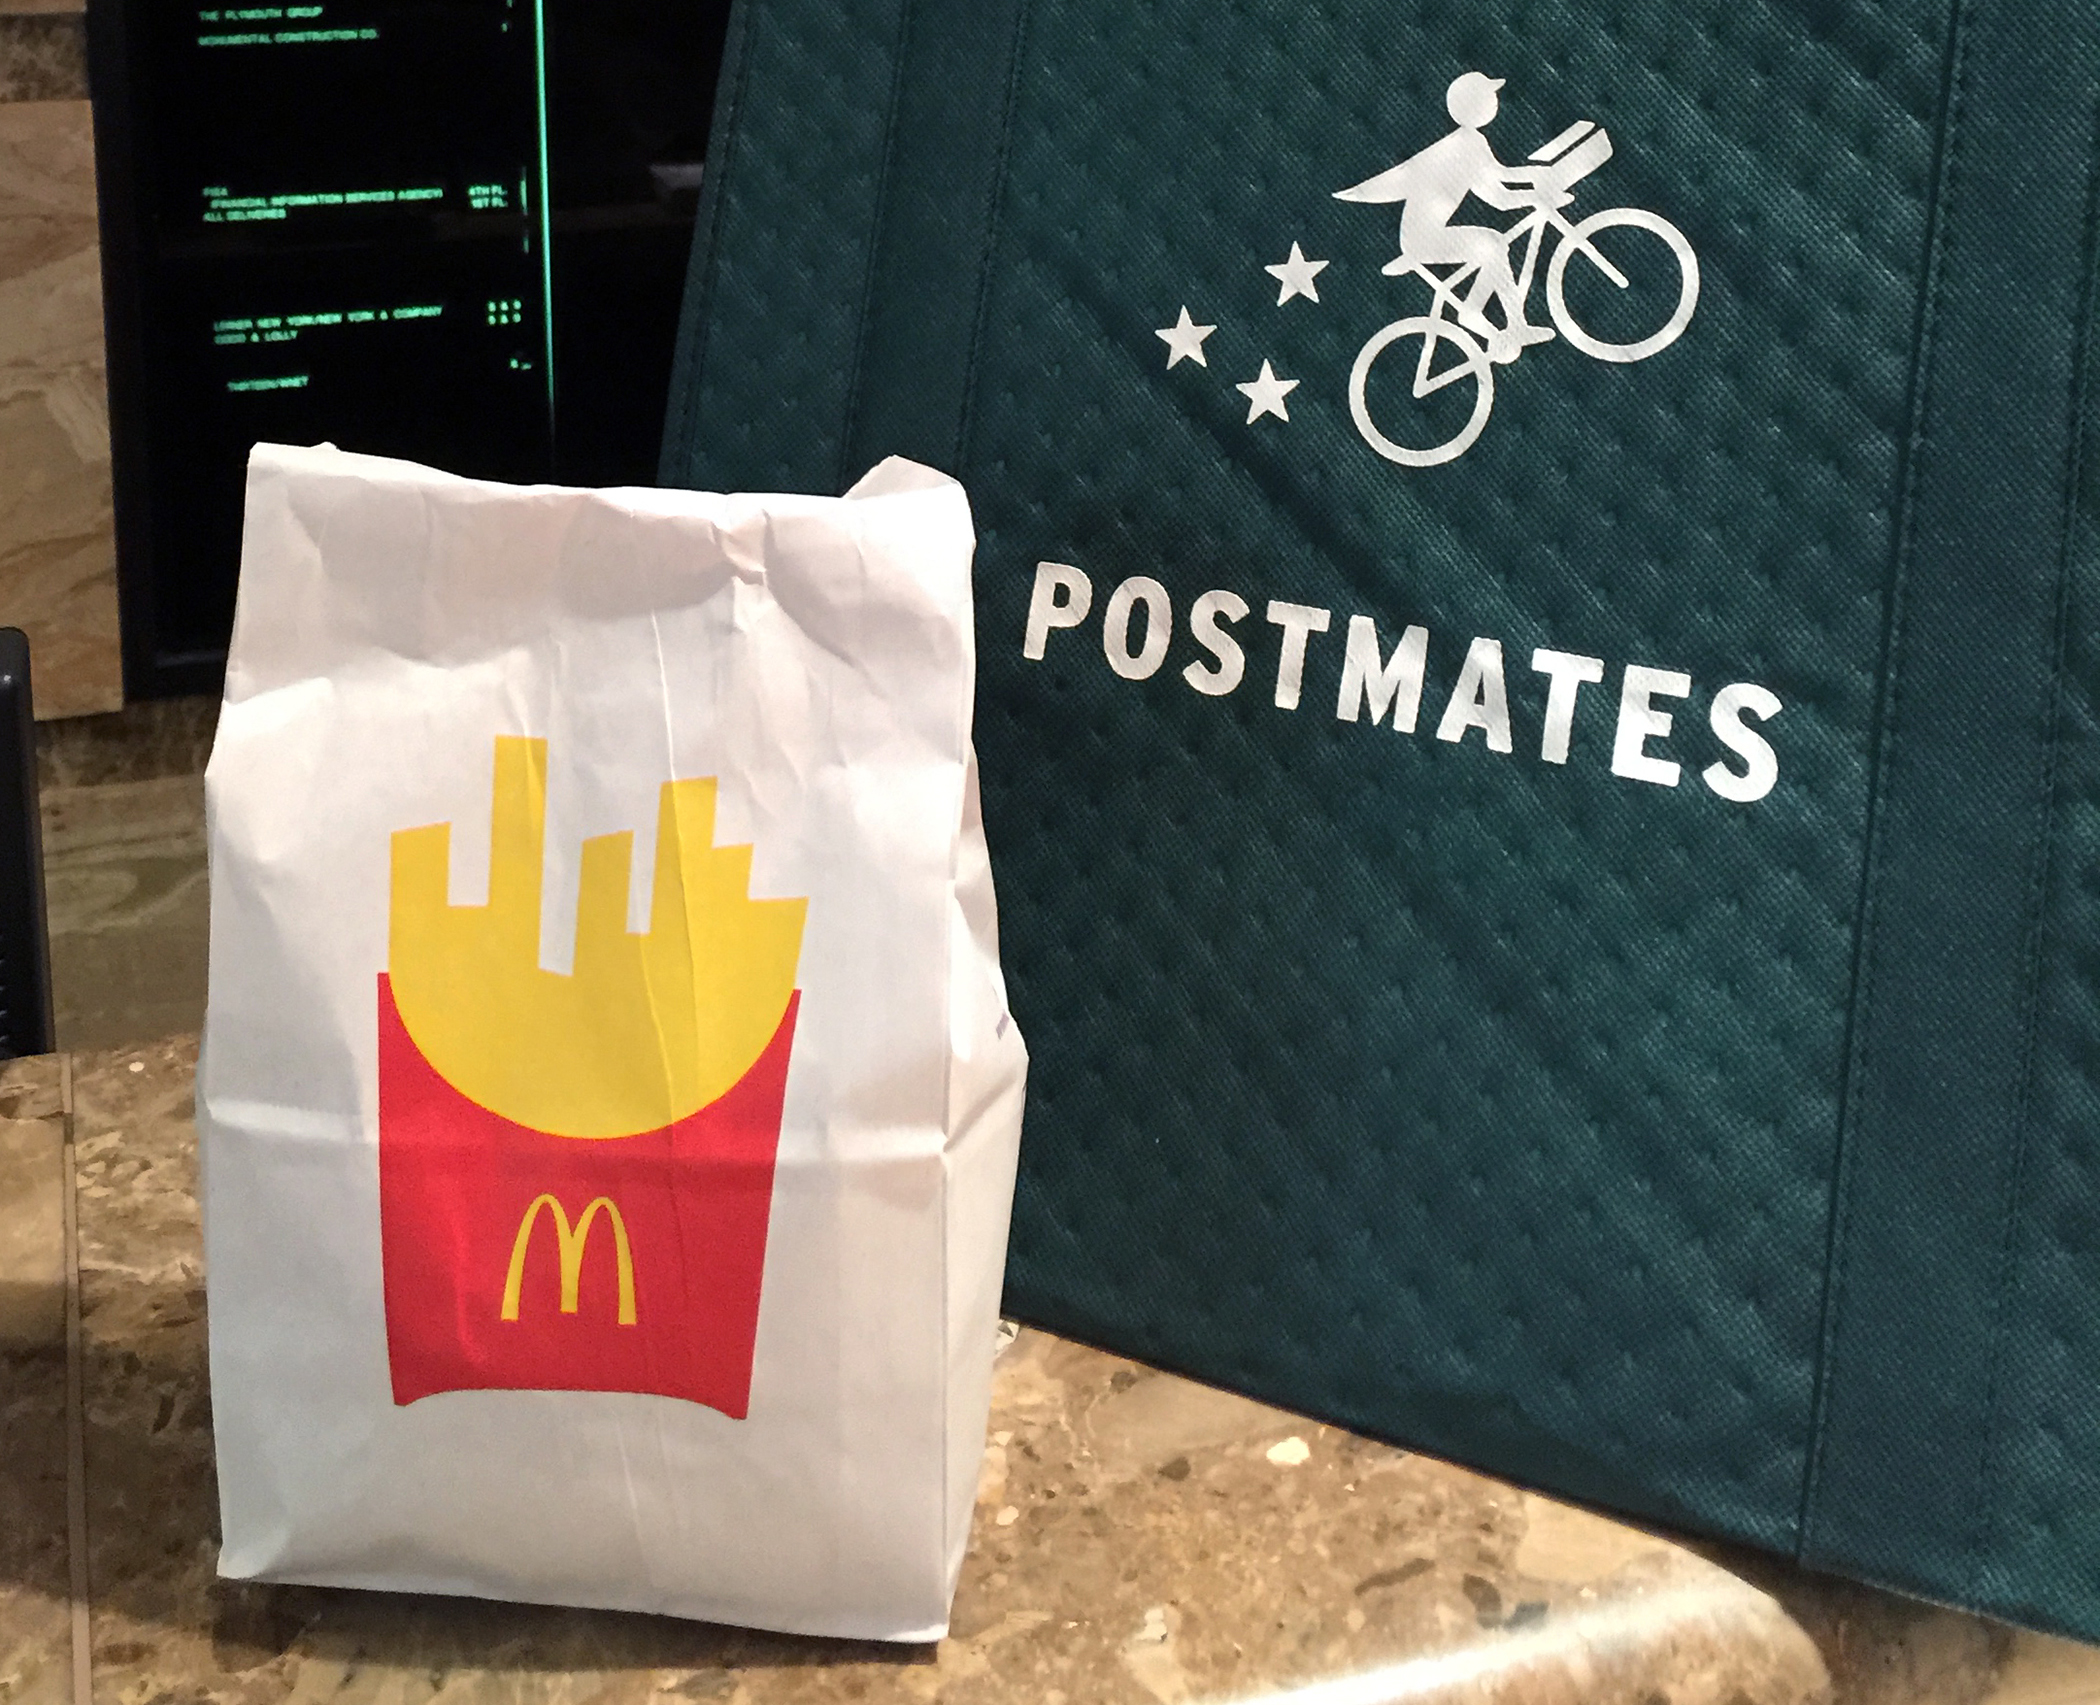 A bag of food from McDonald's ordered through the Postmates service next to a Postmates delivery bag.